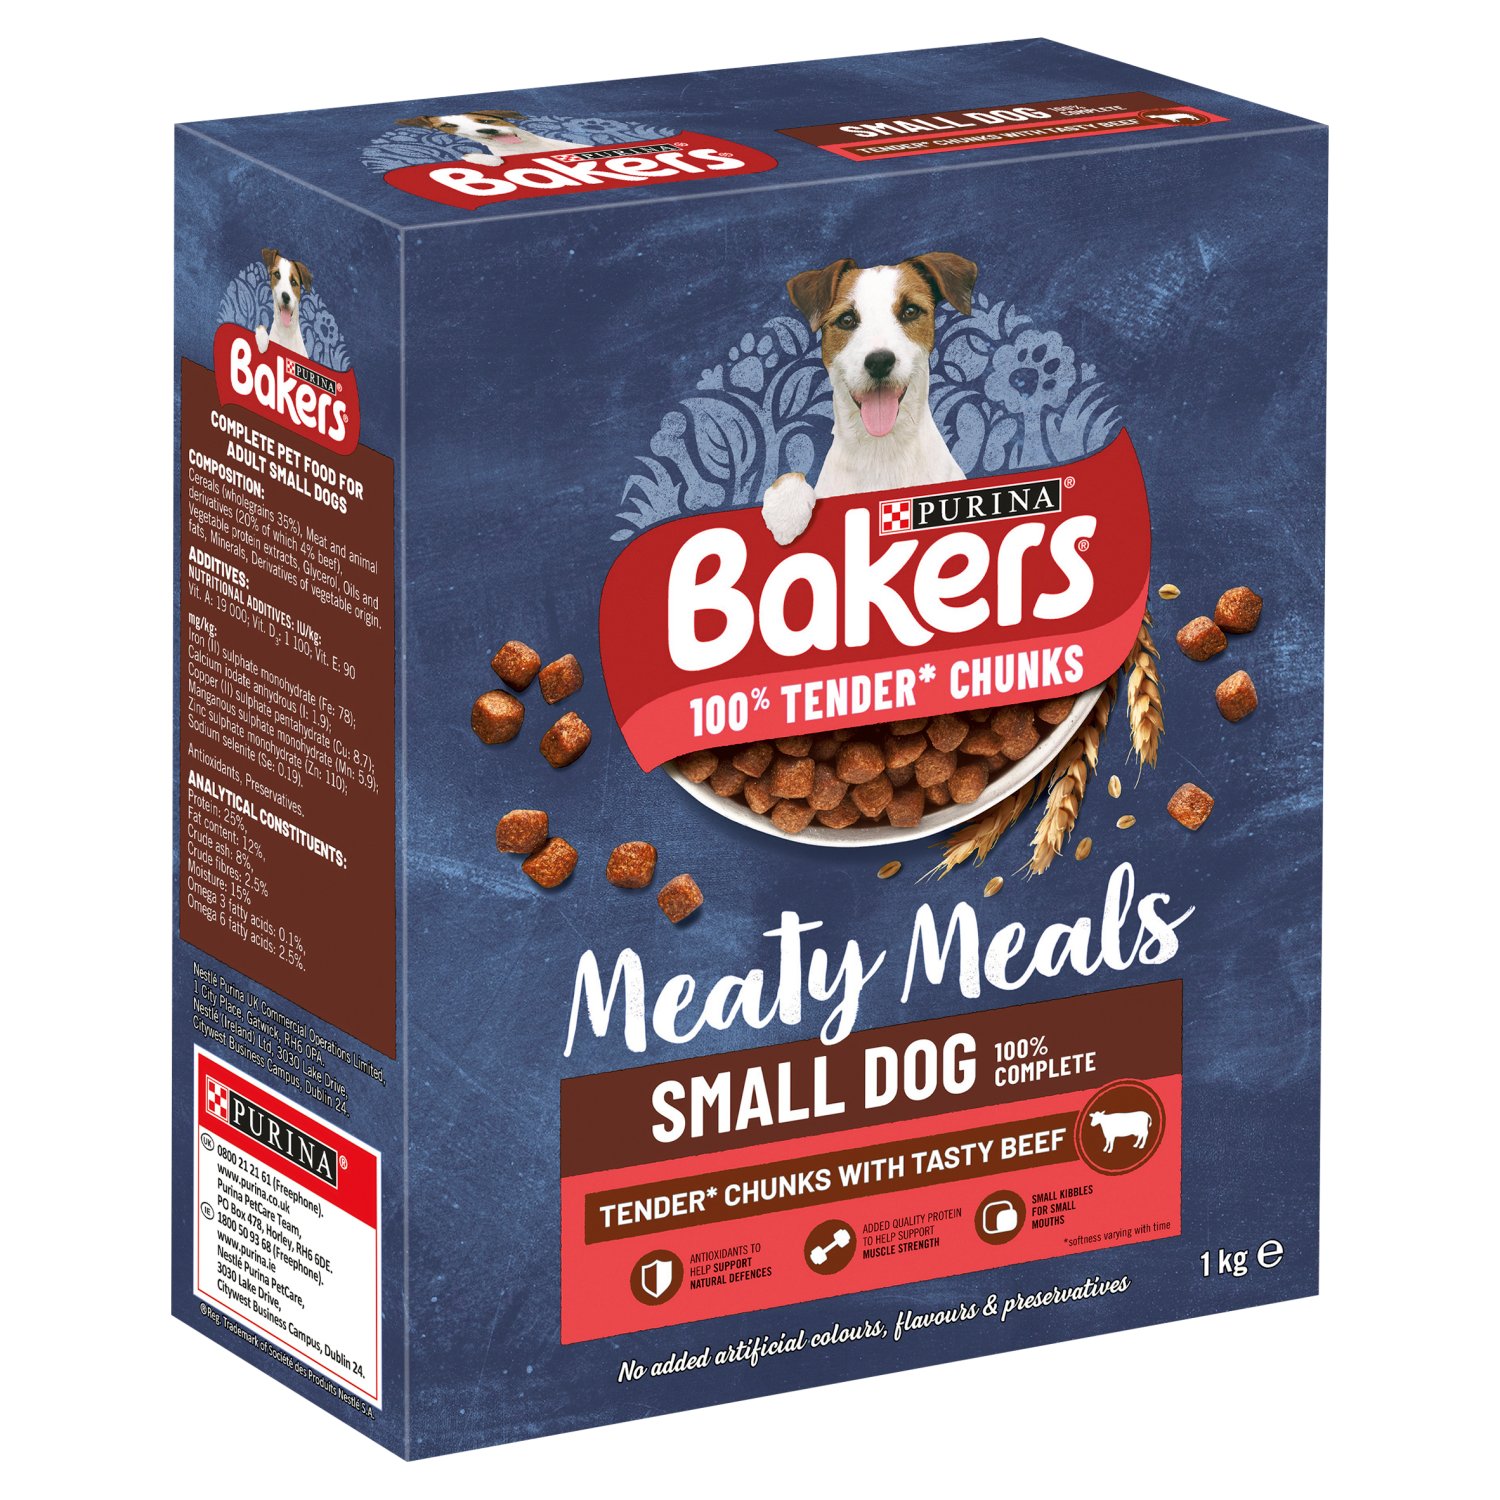 The Bakers® story begins way back in 1851 when Edward Baker set up a family flour business. Fast forward to 1991 when BAKERS® Complete was launched, because Edward Baker believed that dry dog food should be every bit as tasty as it is nutritious. Our recipe has been made with a variety of tender* meaty chunks & wholegrains for quality, tasty goodness. Each meal contains the every day nutrients your dog needs to get on with all the playful & cheeky things that happy & healthy BAKERS® dogs do!
100% Tender* Meaty Chunks
*softness varying with time